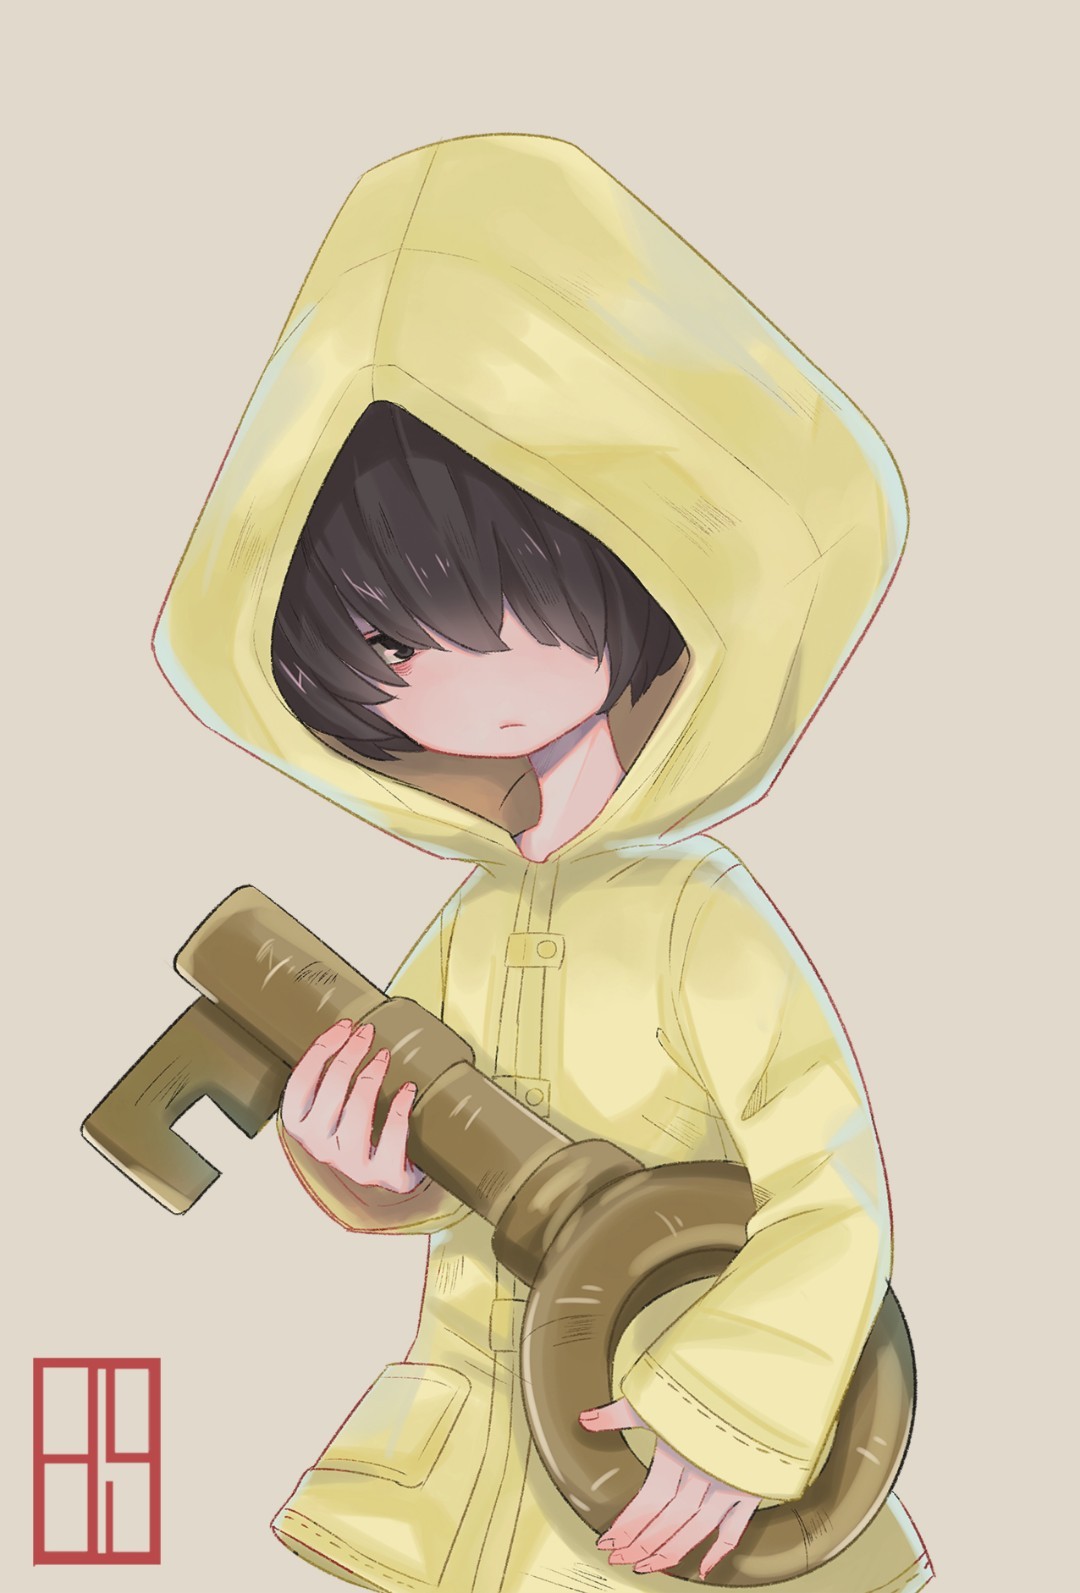 I found a ton of cute Little Nightmares fanart and I'm gonna post it and you can't stop me